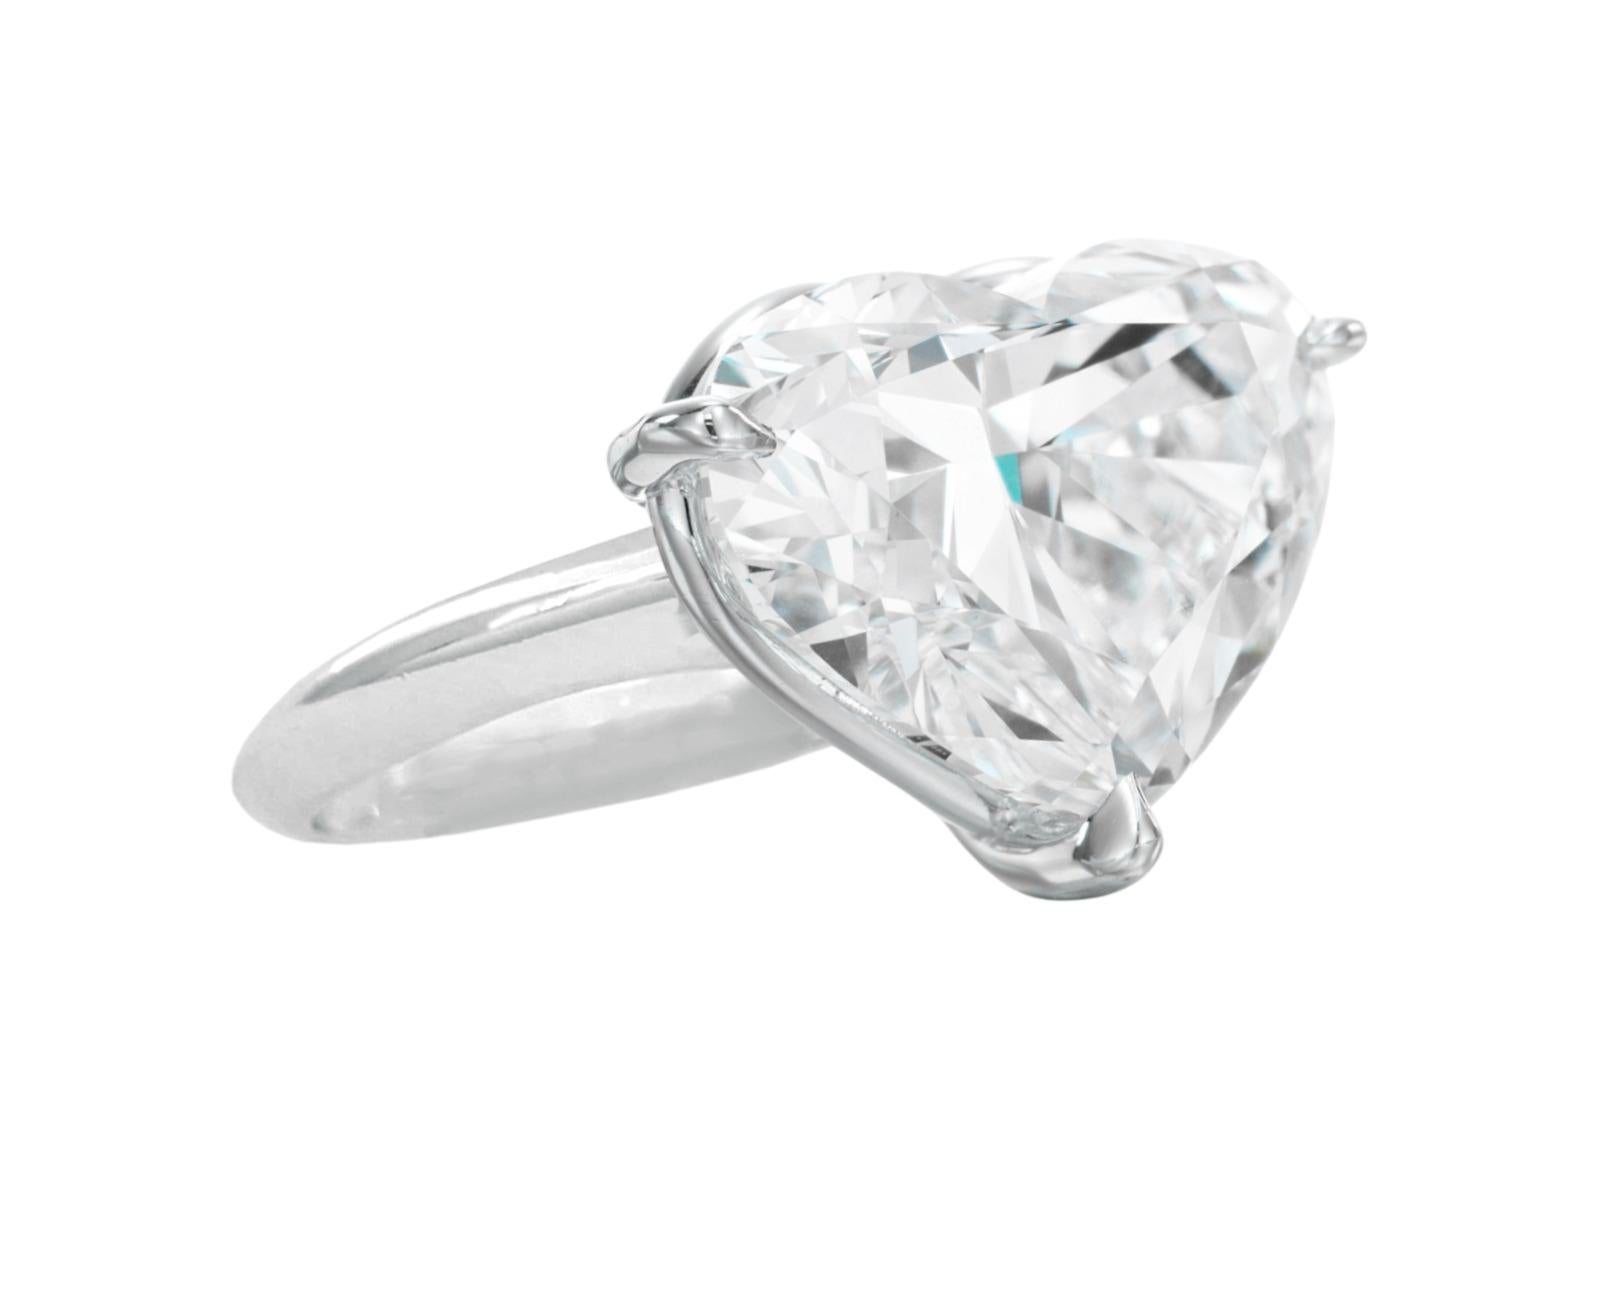 This amazing 5 carat heart shape diamond is set in solid platinum made in Italy by our best artisans 

the stone has been certified by GIA